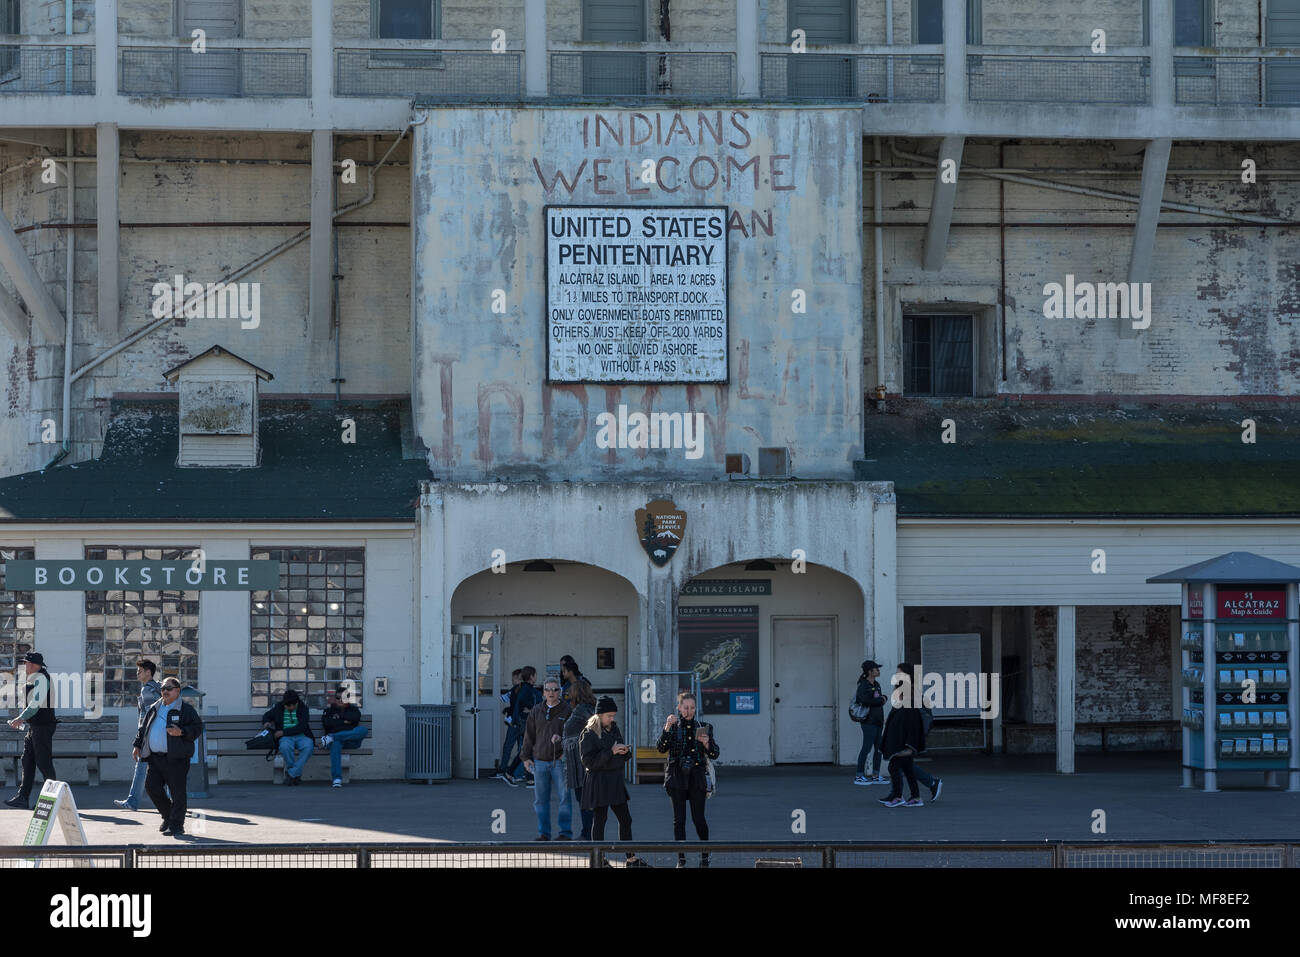 The Alcatraz visitor center with Indians Welcome graffiti Stock Photo